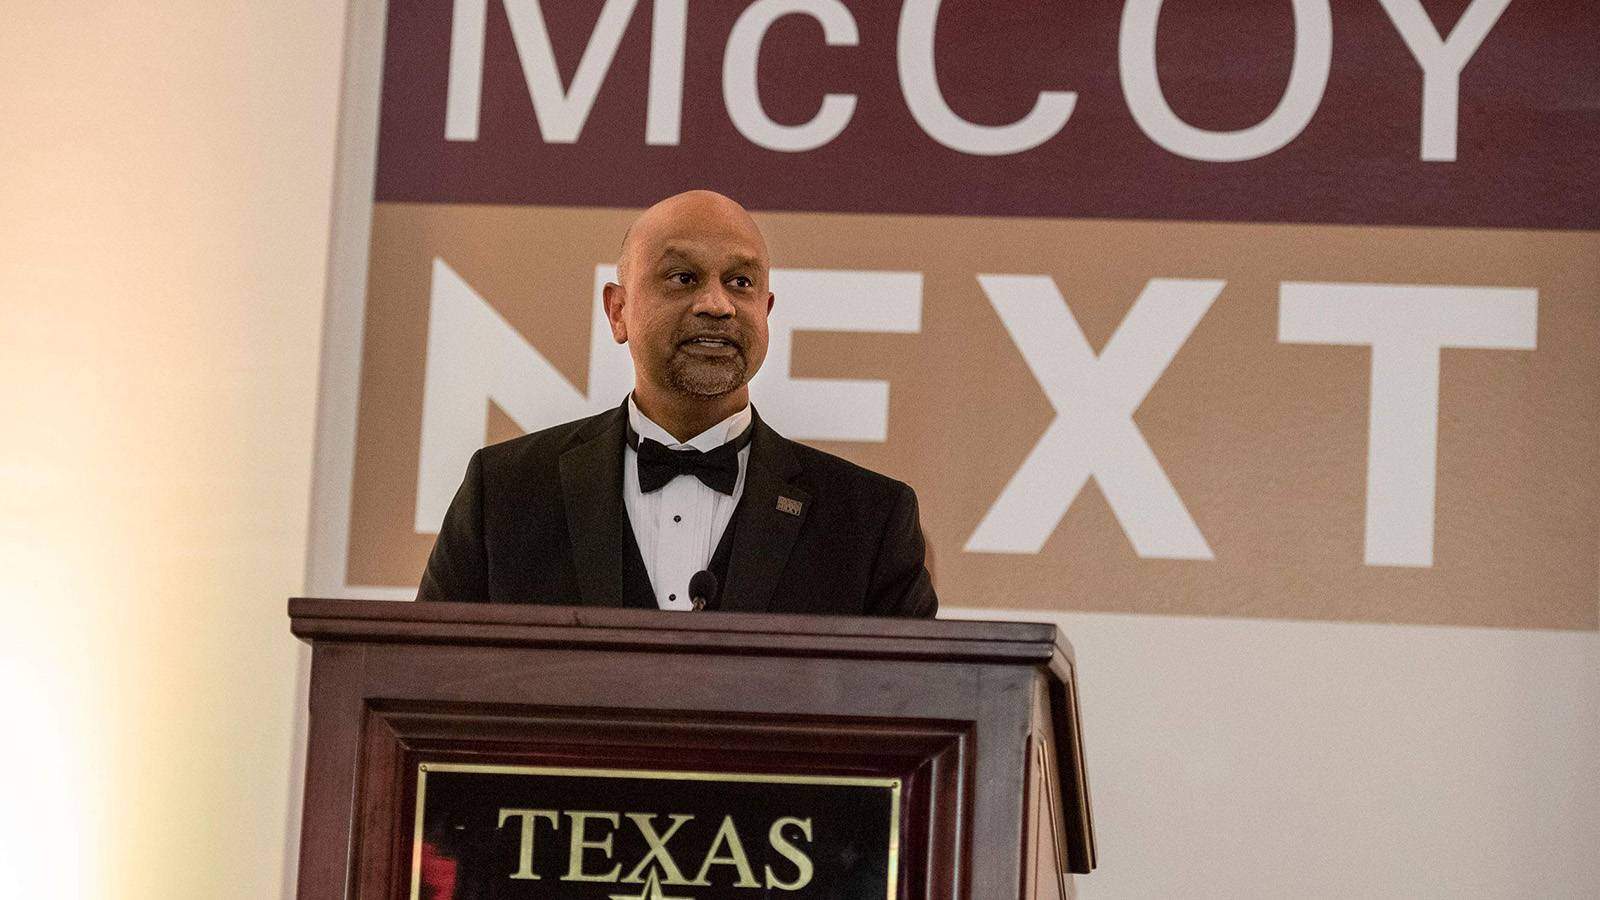 McCoy College Dean Sanjay Ramchander in a tuxedo speaking at a podium at the McCoy Next Gala in March 2022